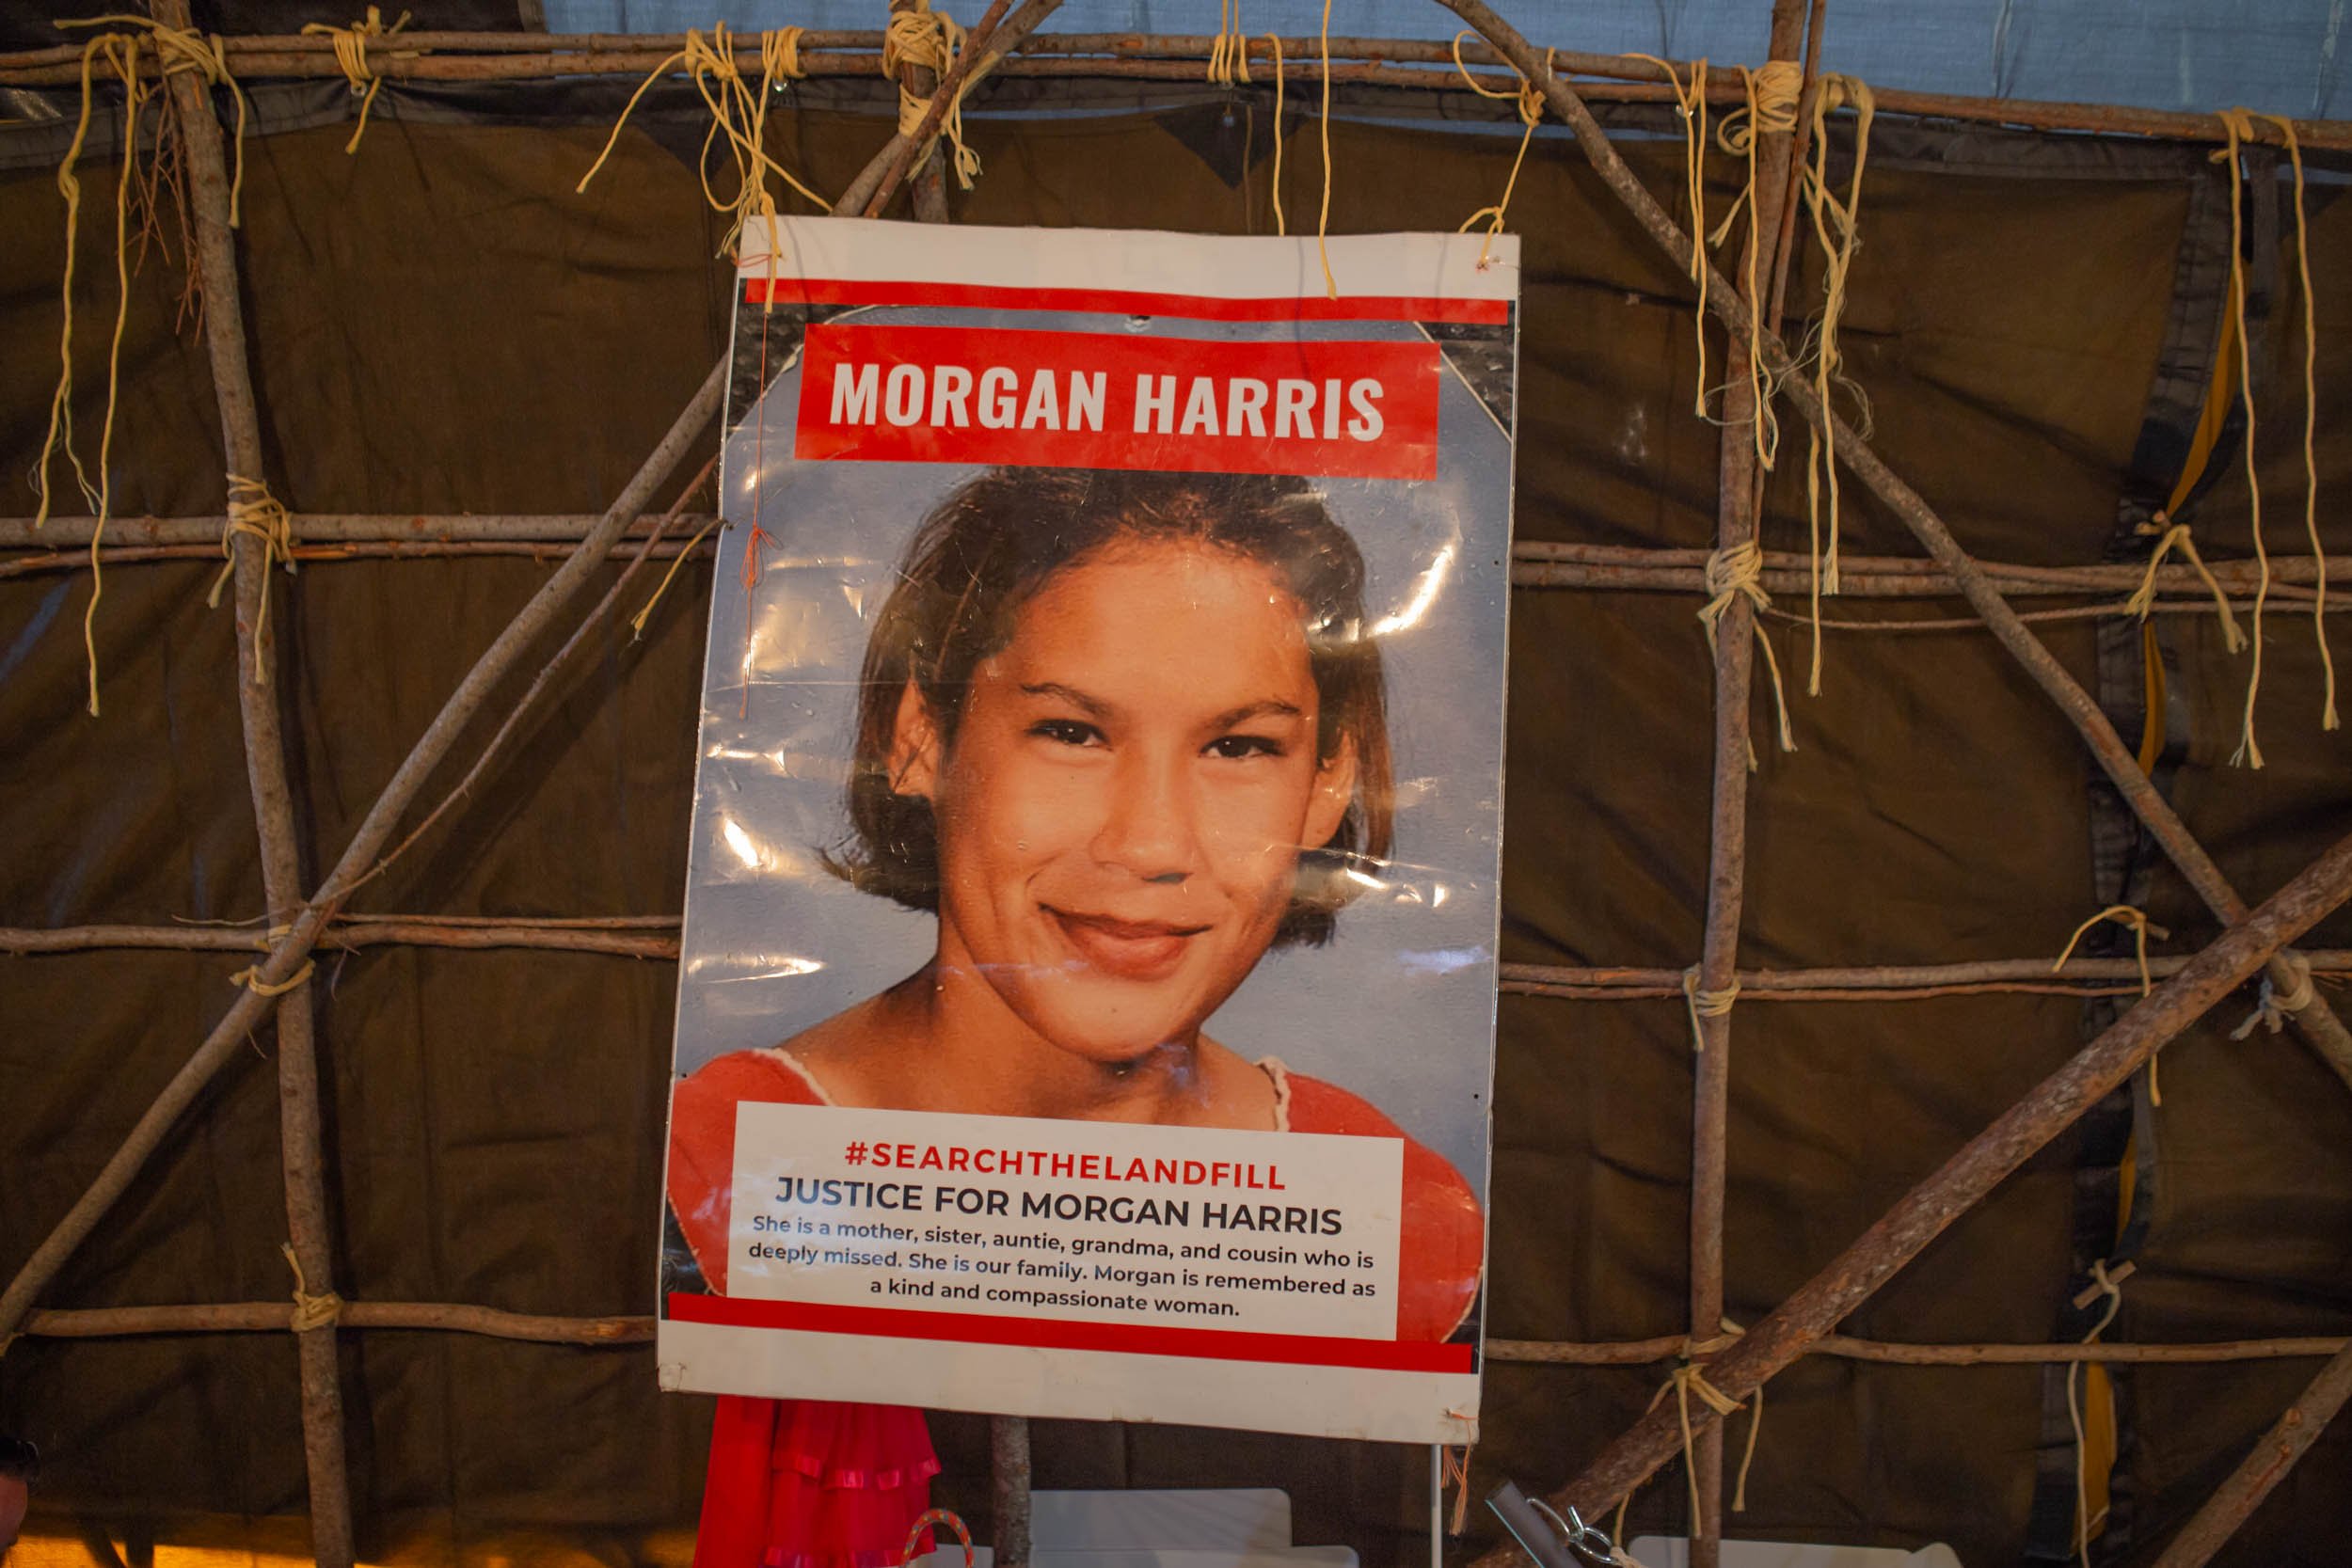  Inside a wigwam built by community members at Camp Morgan next to Brady Landfill, a large poster of Morgan Harris hangs amongst other protest signs and messages seeking justice. Harris was targeted and murdered in 2022 and her remains had still not 